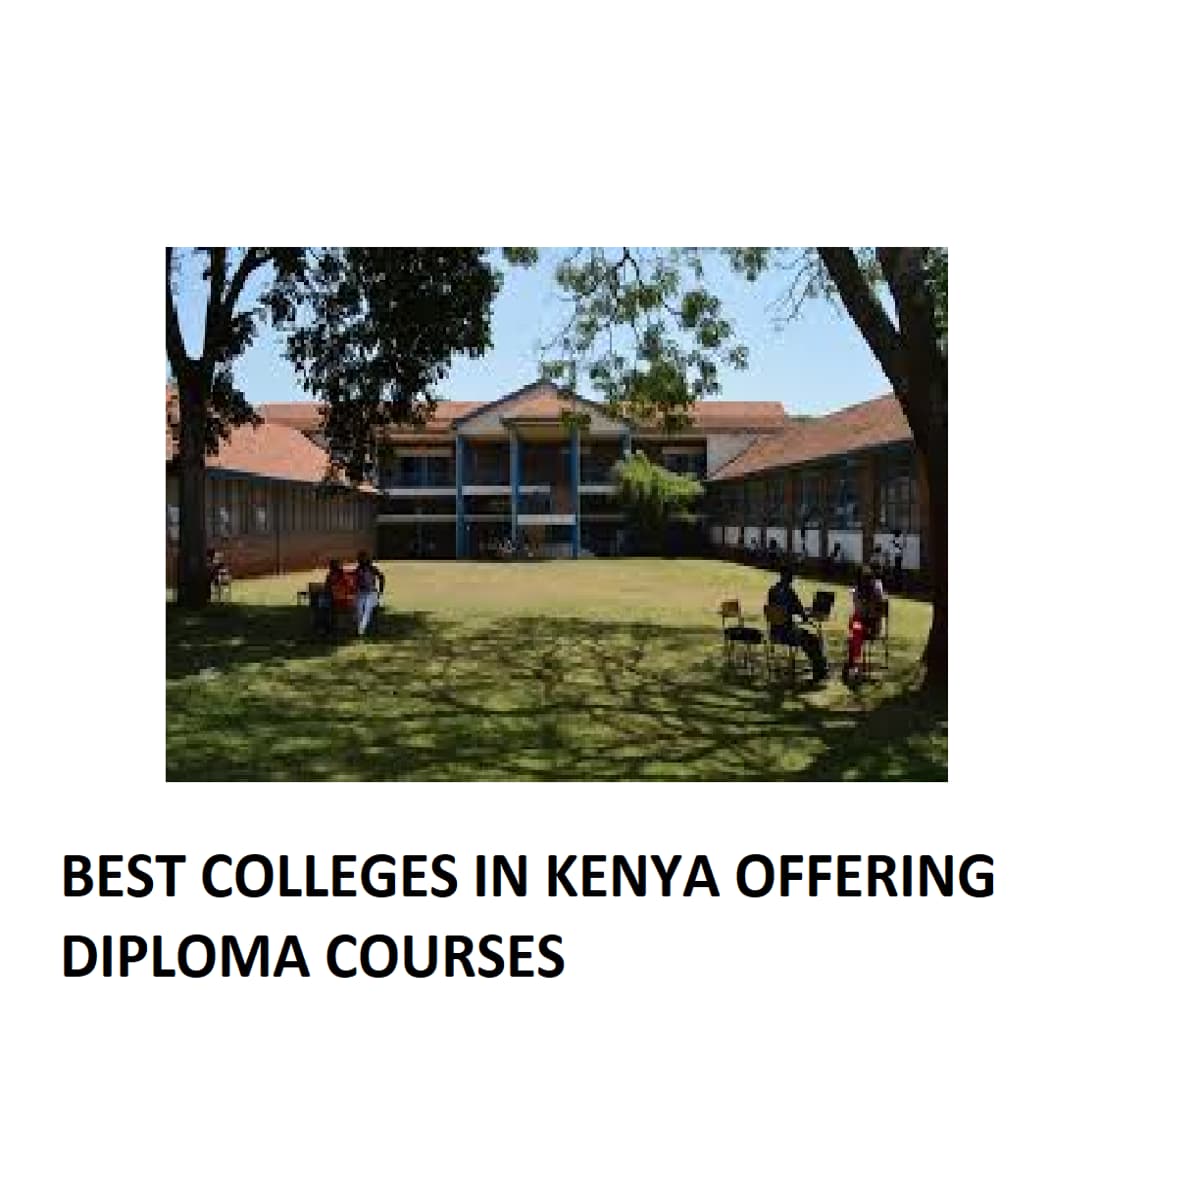 Best Colleges in Kenya Offering Diploma Courses